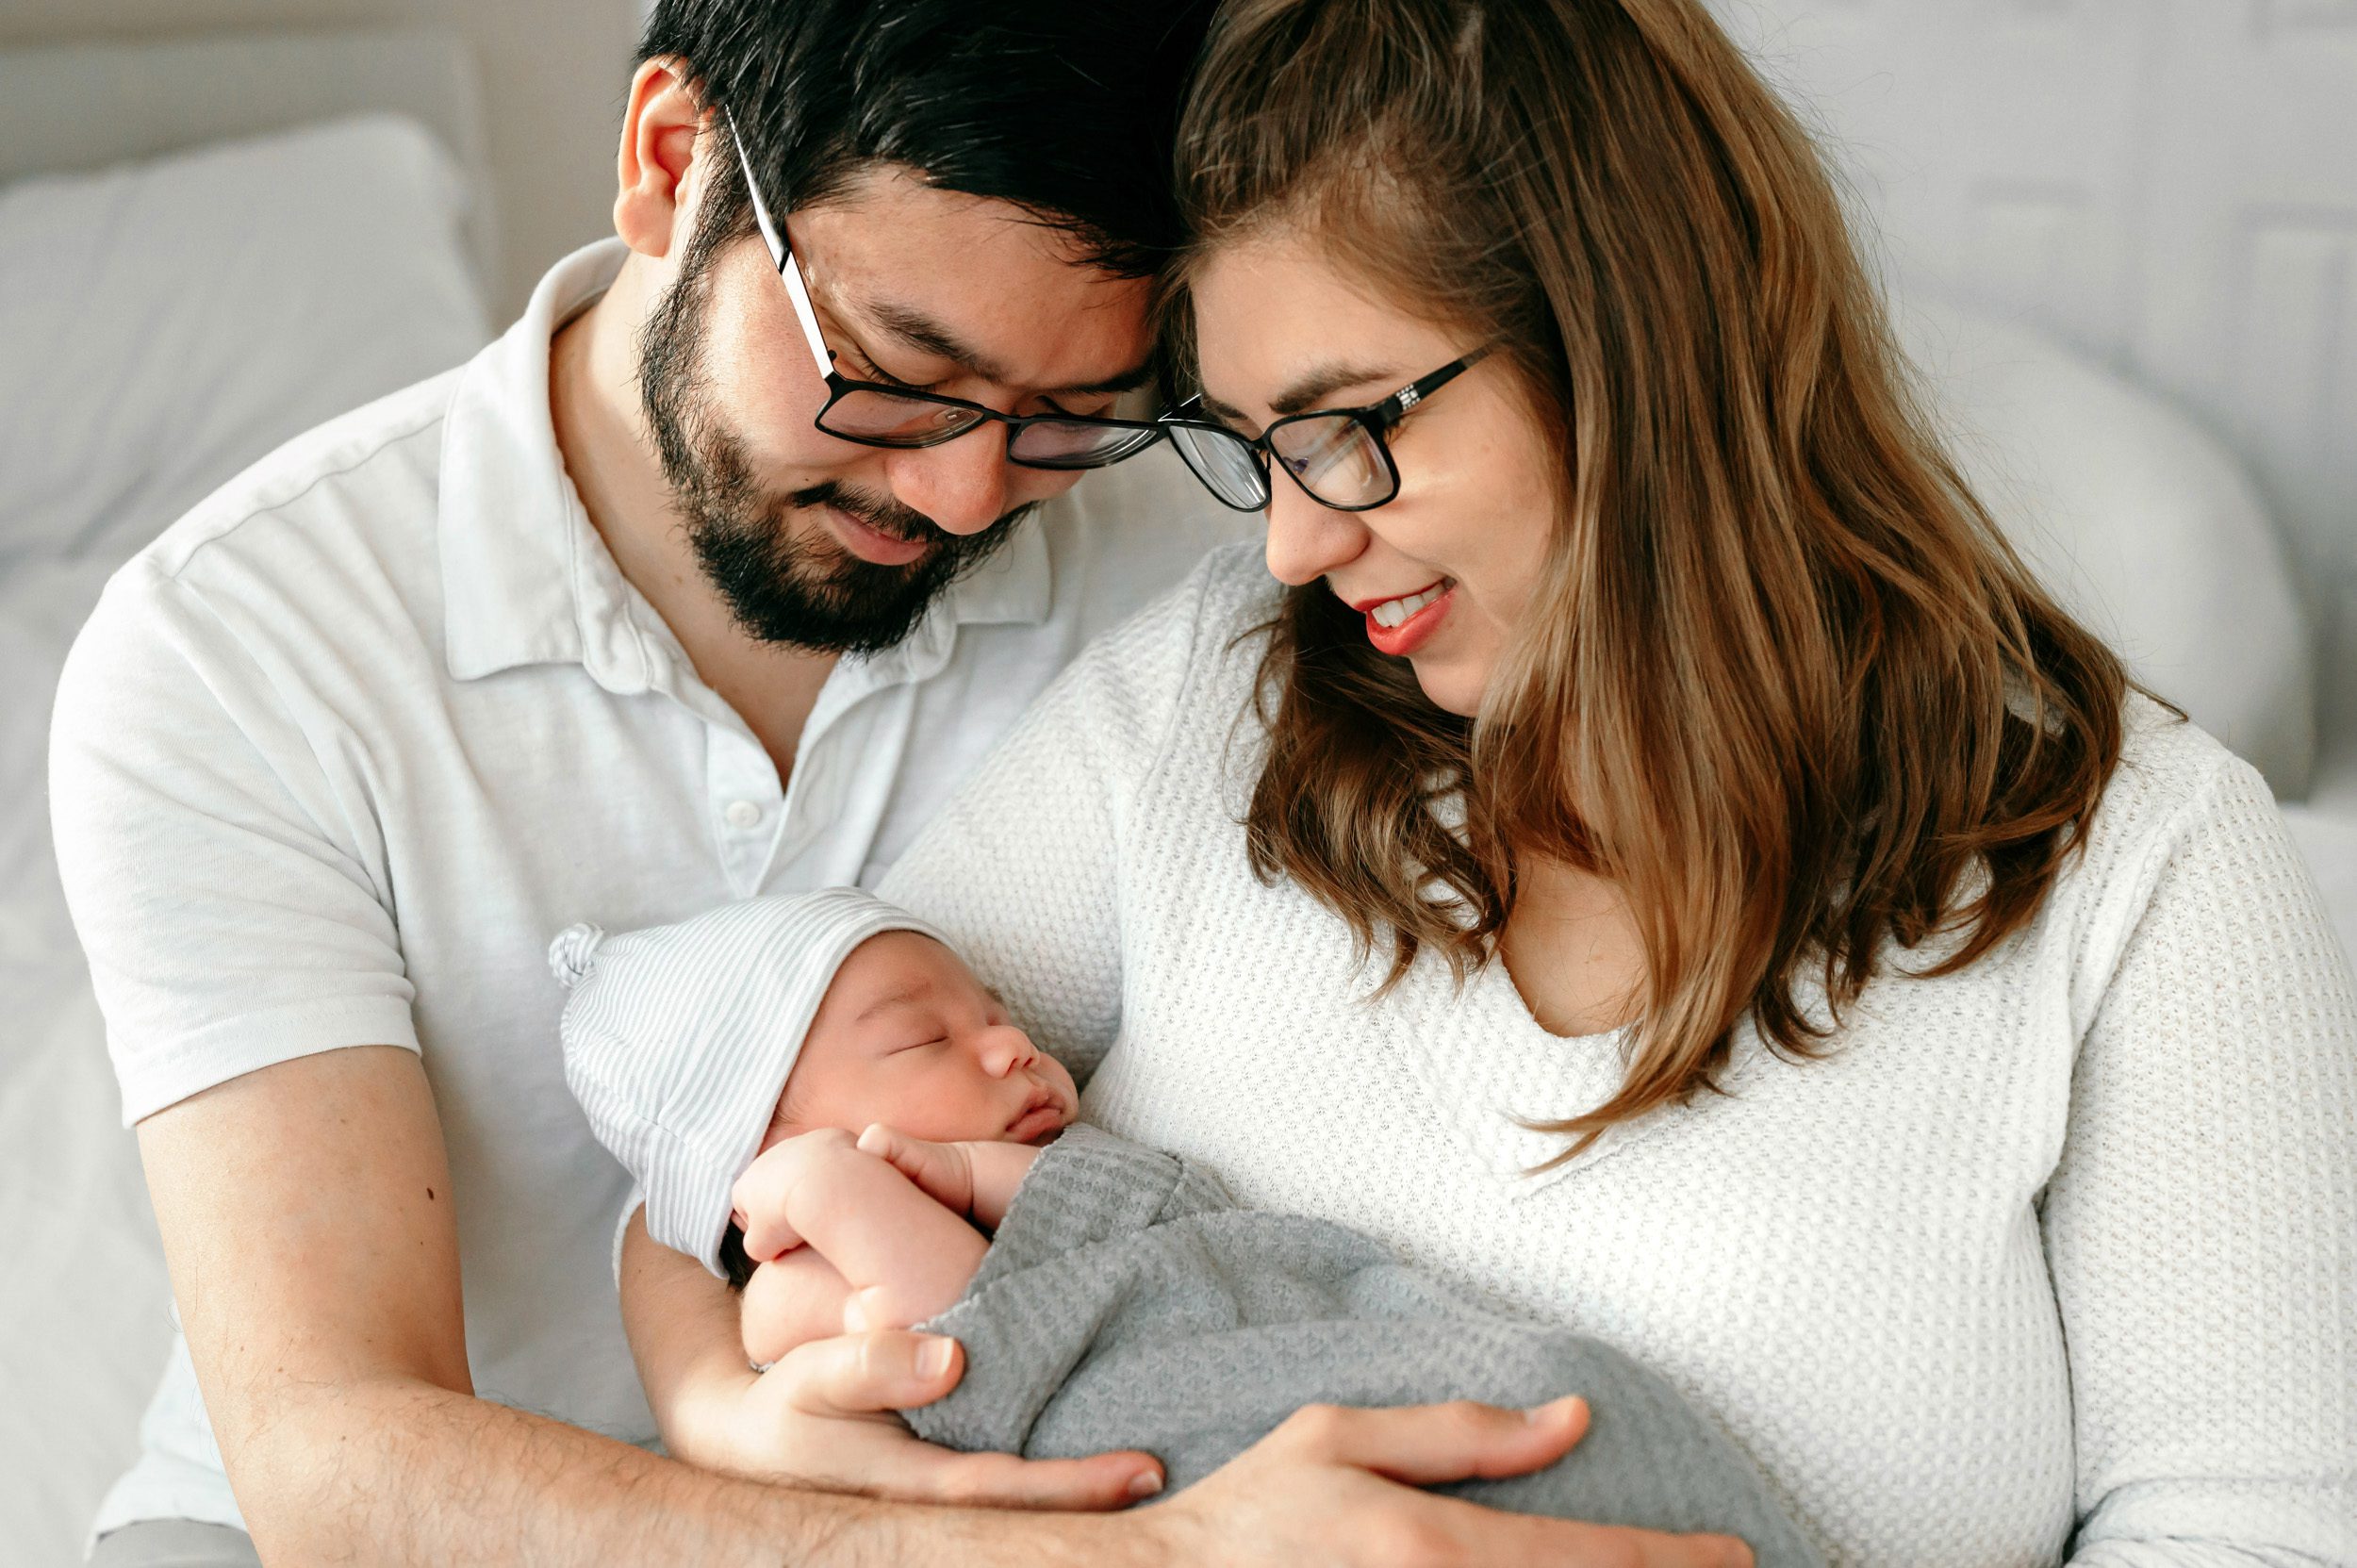 new parents wearing white shirts holding their baby boy in their arms and resting their foreheads together as they gaze down at him adoringly during a newborn photos session